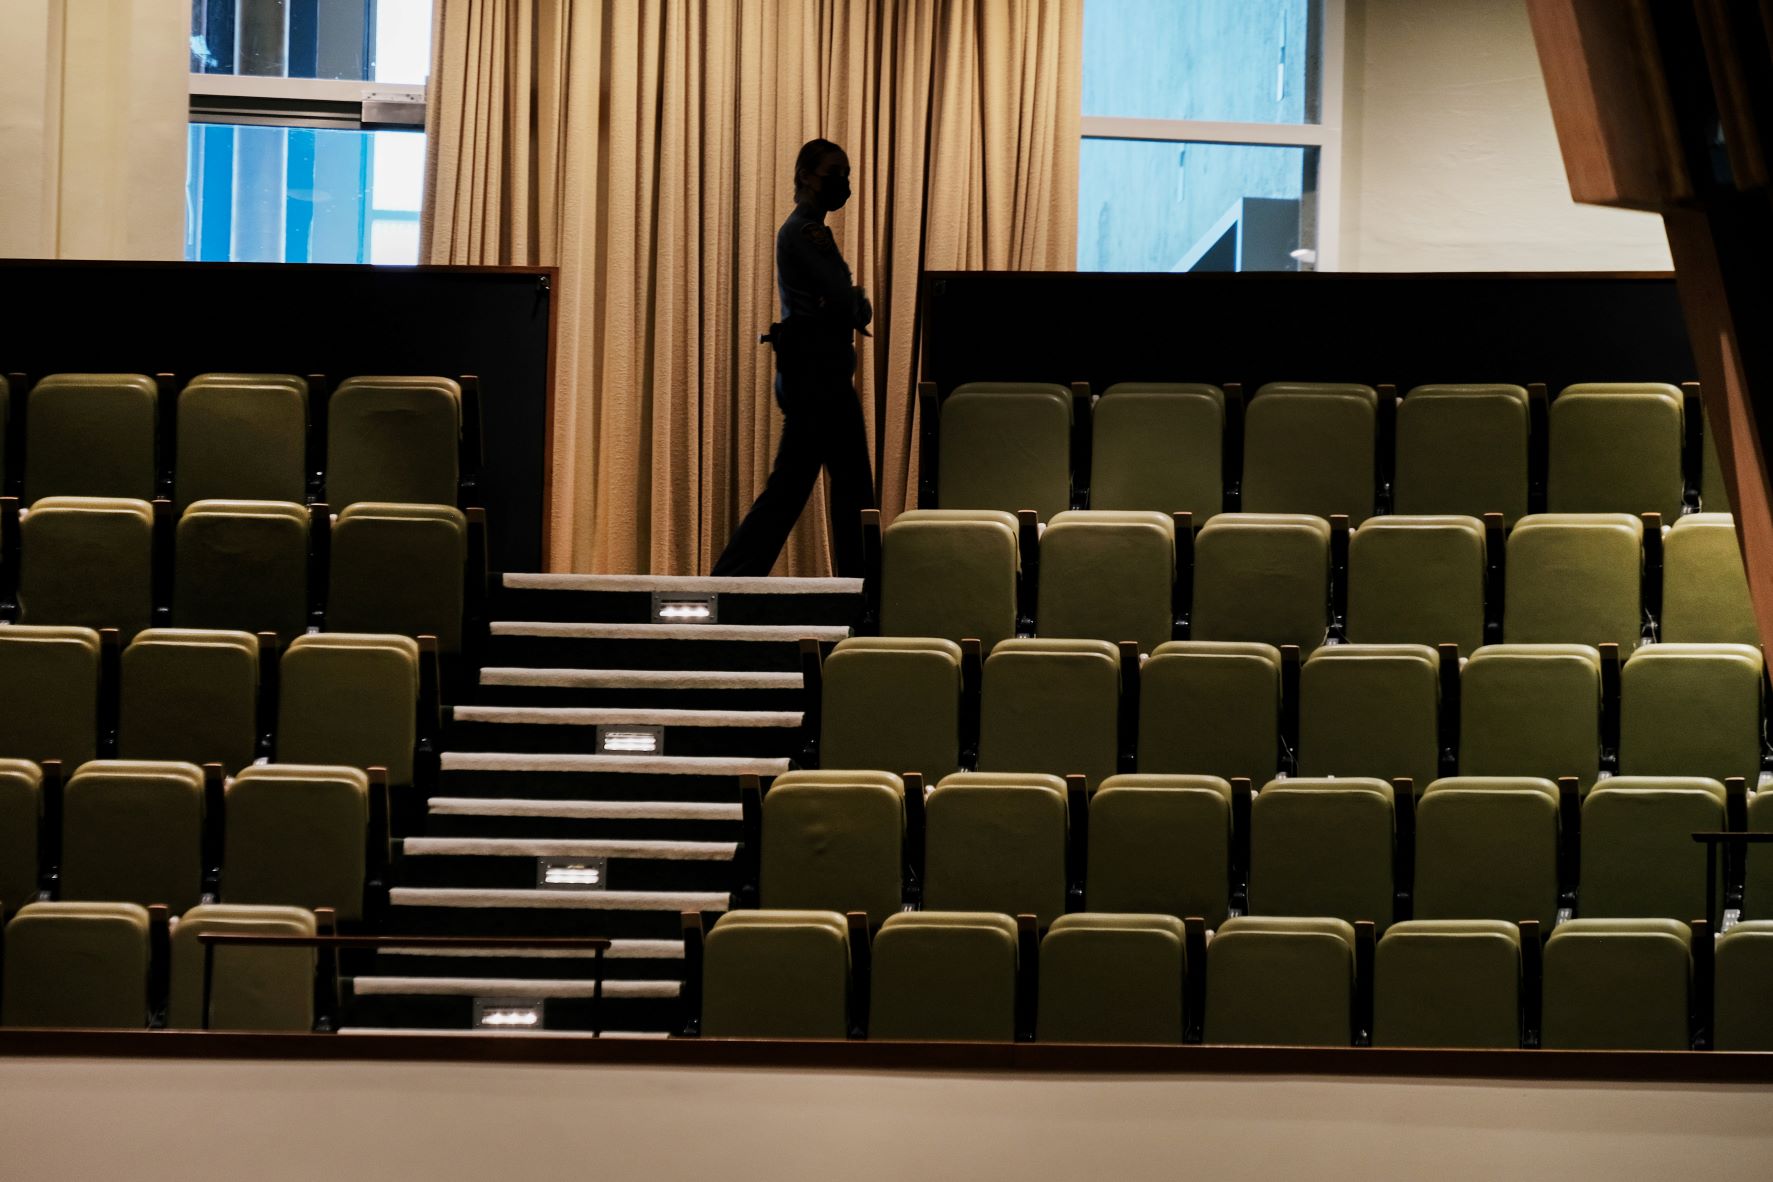 A United Nations security guard walks through an empty hall as COVID-19 restrictions have kept the number of delegates limited at the seventy-sixth session of the United Nations General Assembly in New York on September 23, 2021.